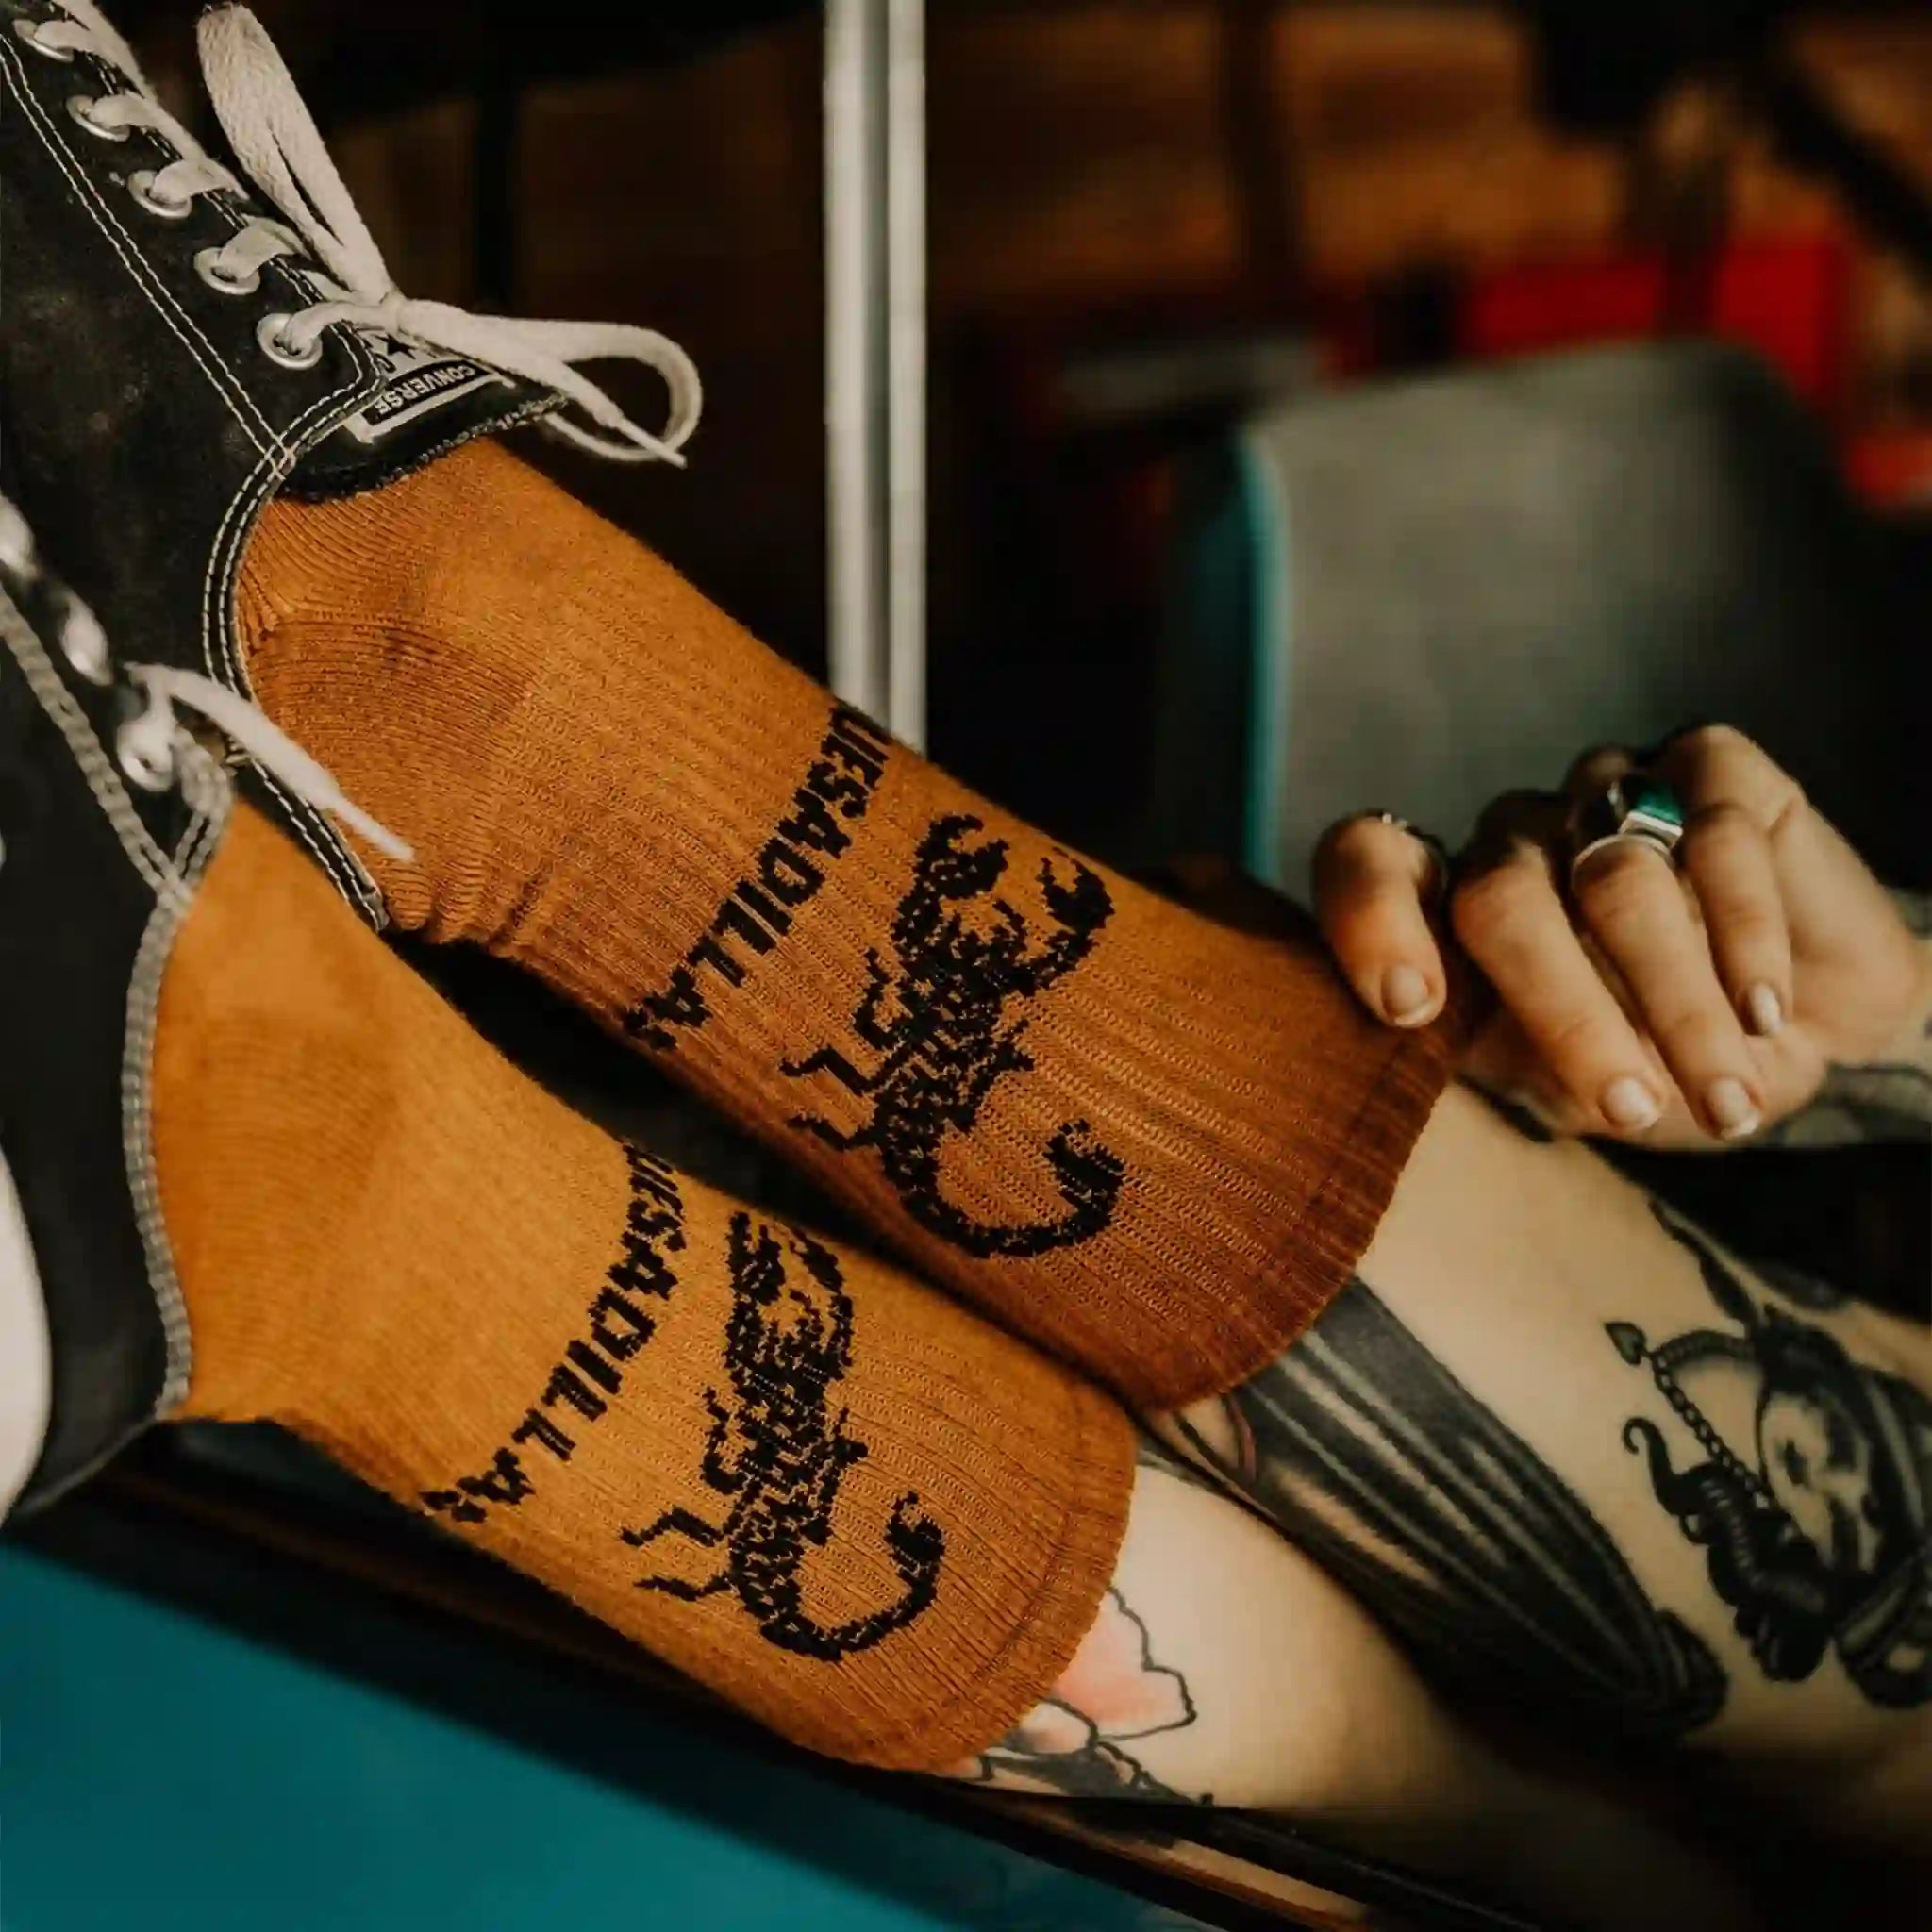 A model wearing a pair of burnt orange crew socks with a black scorpion graphic and text that reads, "Quesadilla".